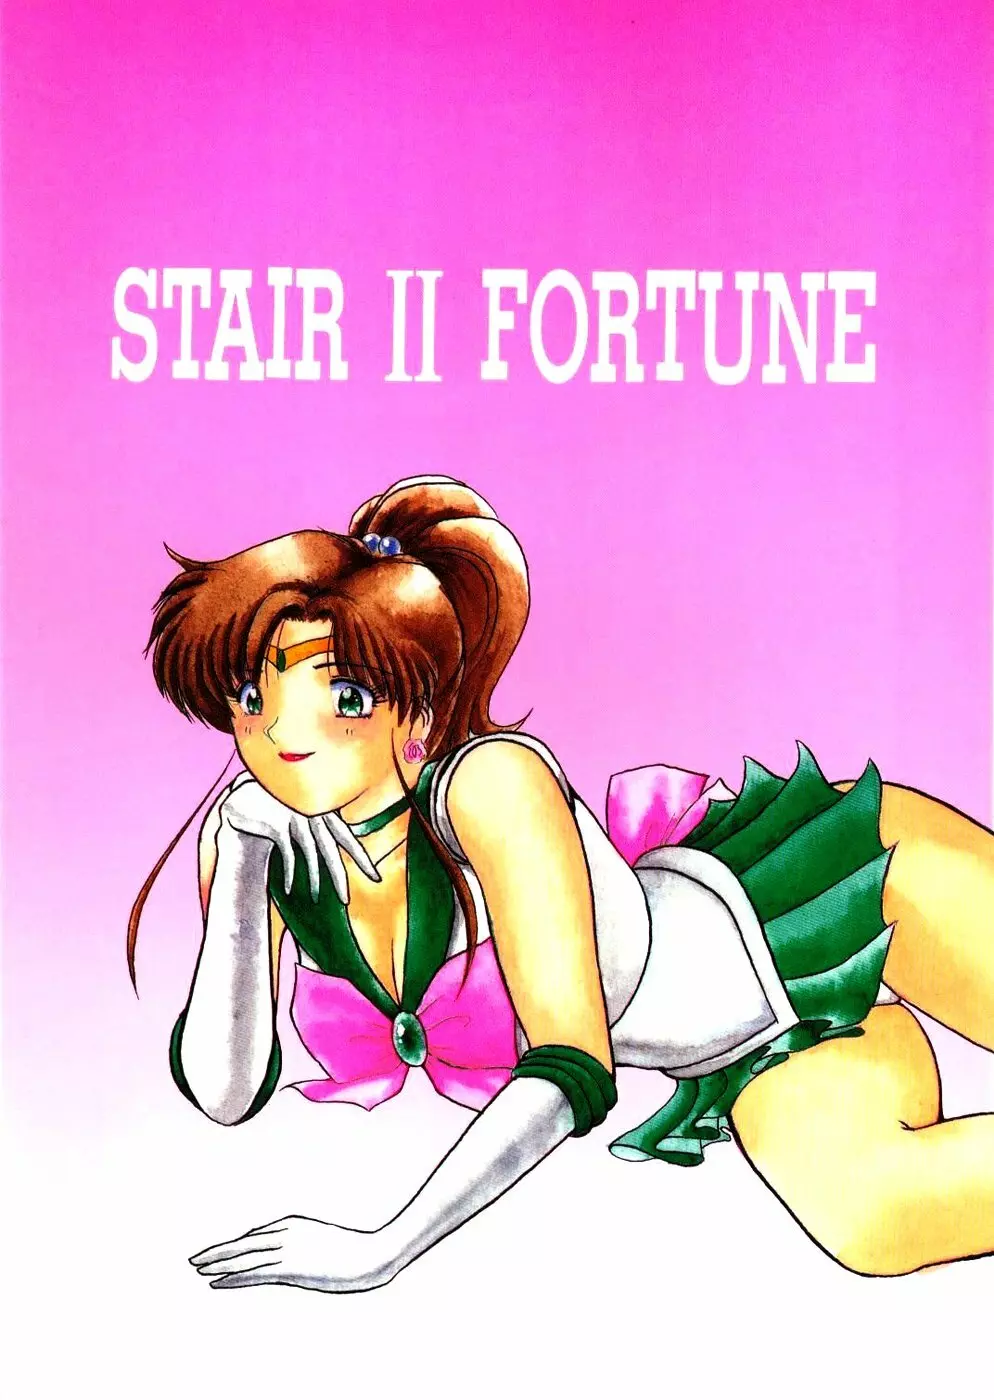 STAIR Ⅱ FORTUNE